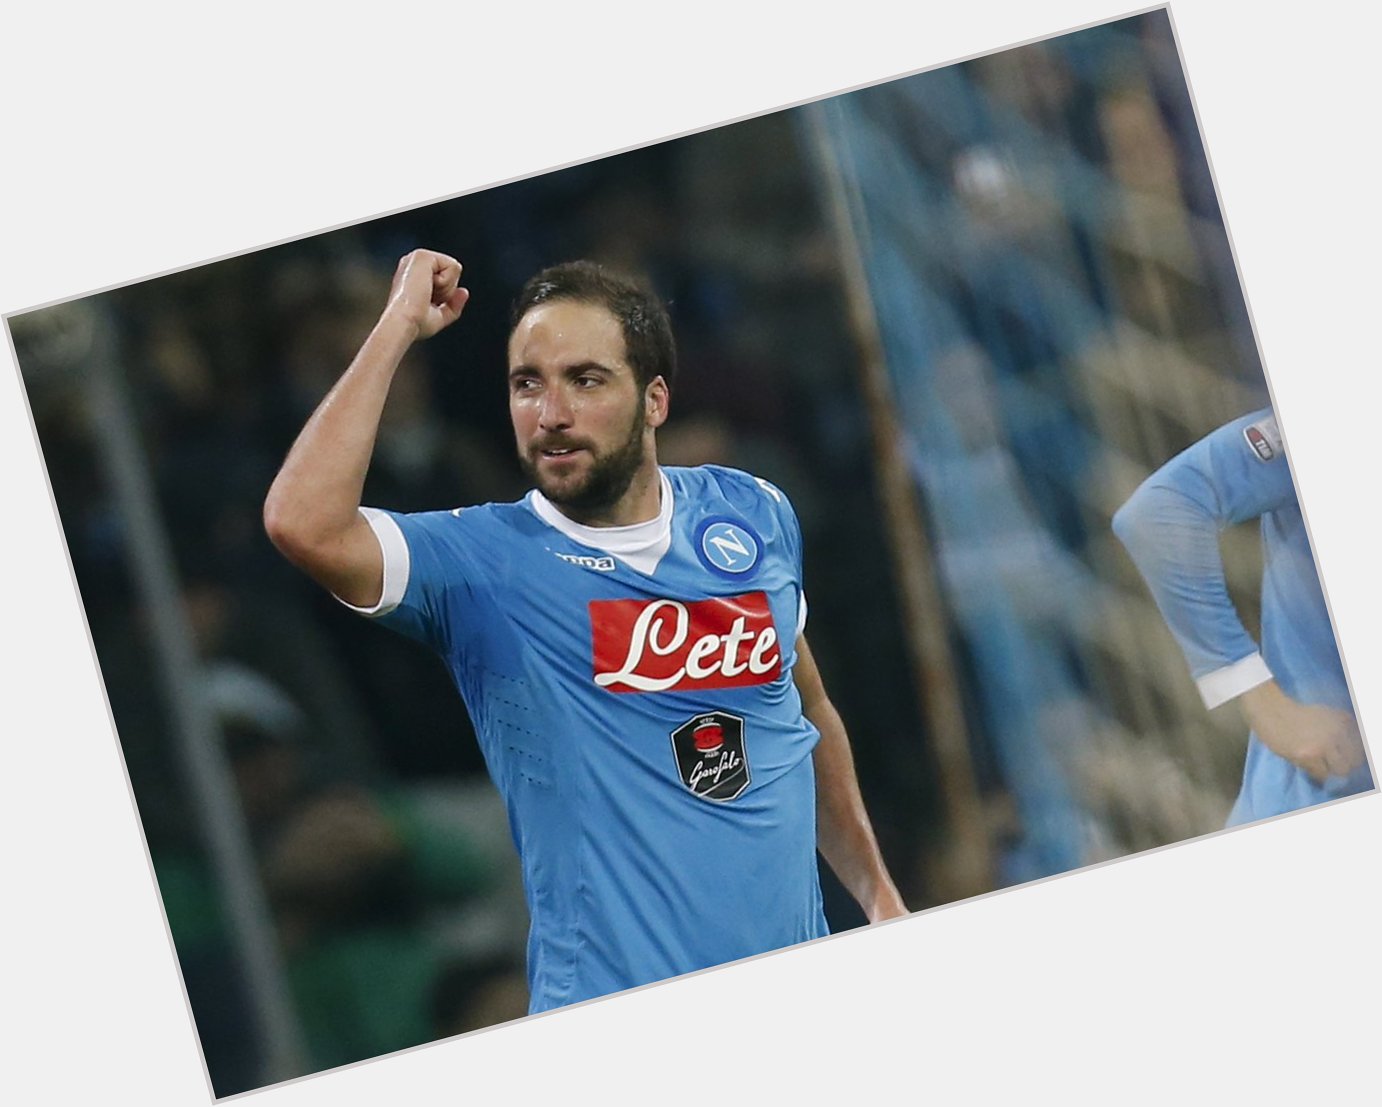 Happy 28th birthday, Gonzalo Higuaín. He has more Serie A goals (49) since he joined Napoli than any other player. 